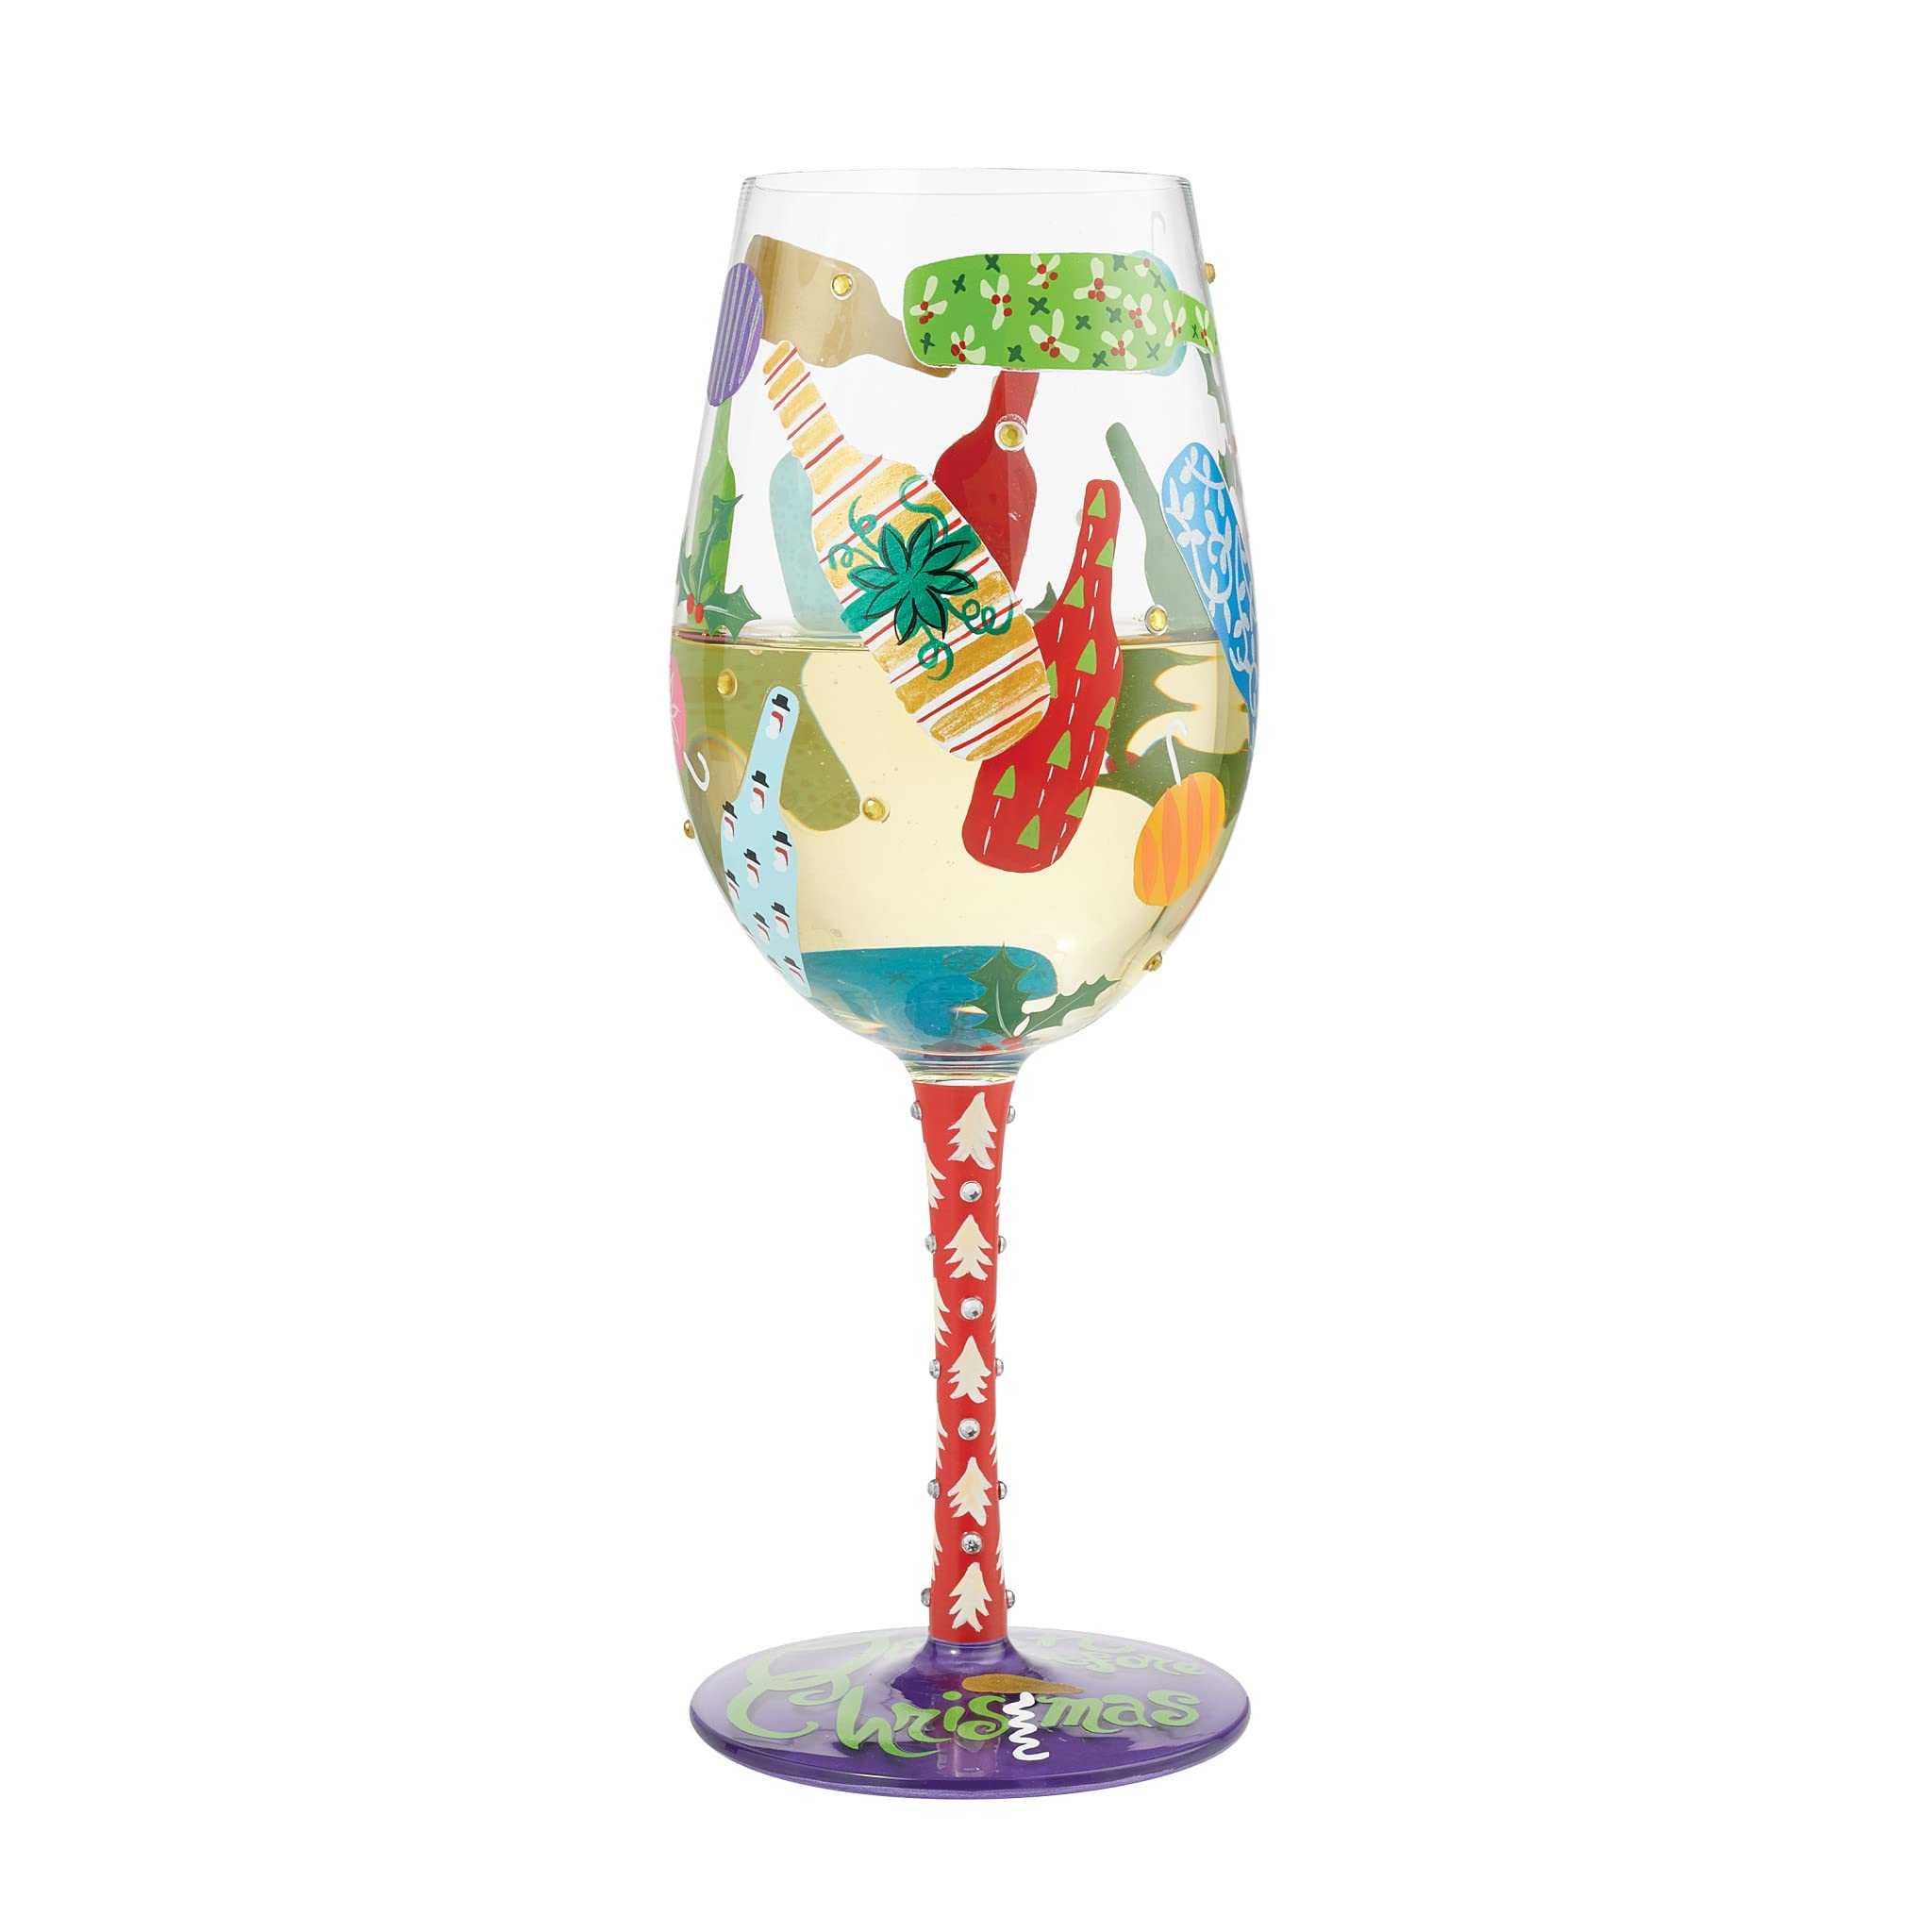 Enesco Designs by Lolita Holiday Open Before Christmas Hand-Painted Artisan Wine Glass, 15 Ounce, Multicolor